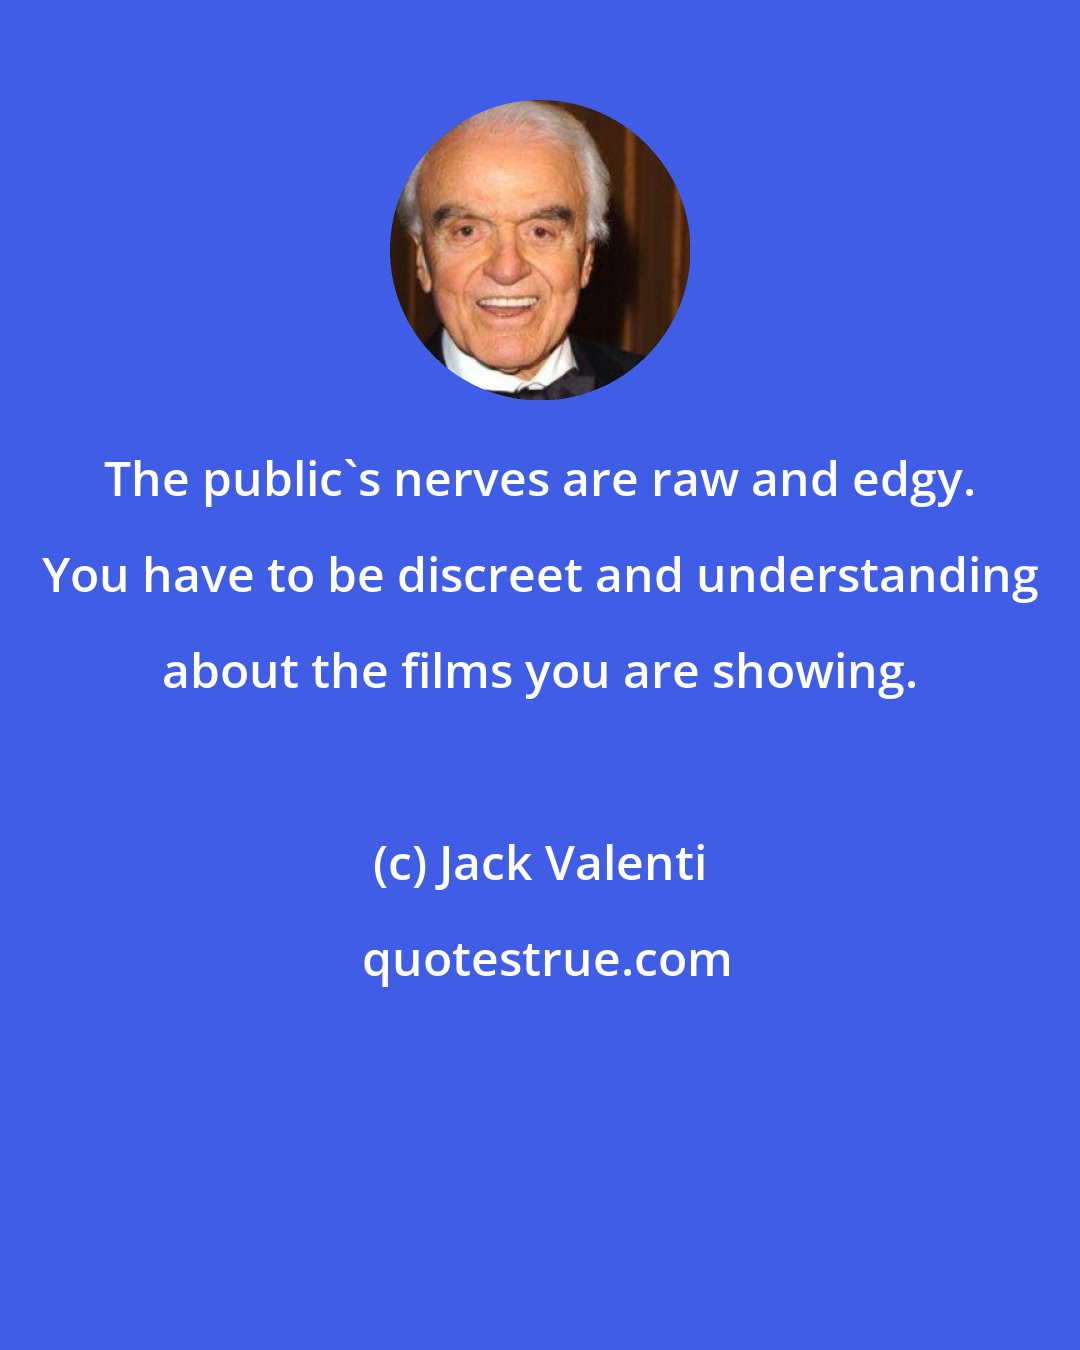 Jack Valenti: The public's nerves are raw and edgy. You have to be discreet and understanding about the films you are showing.